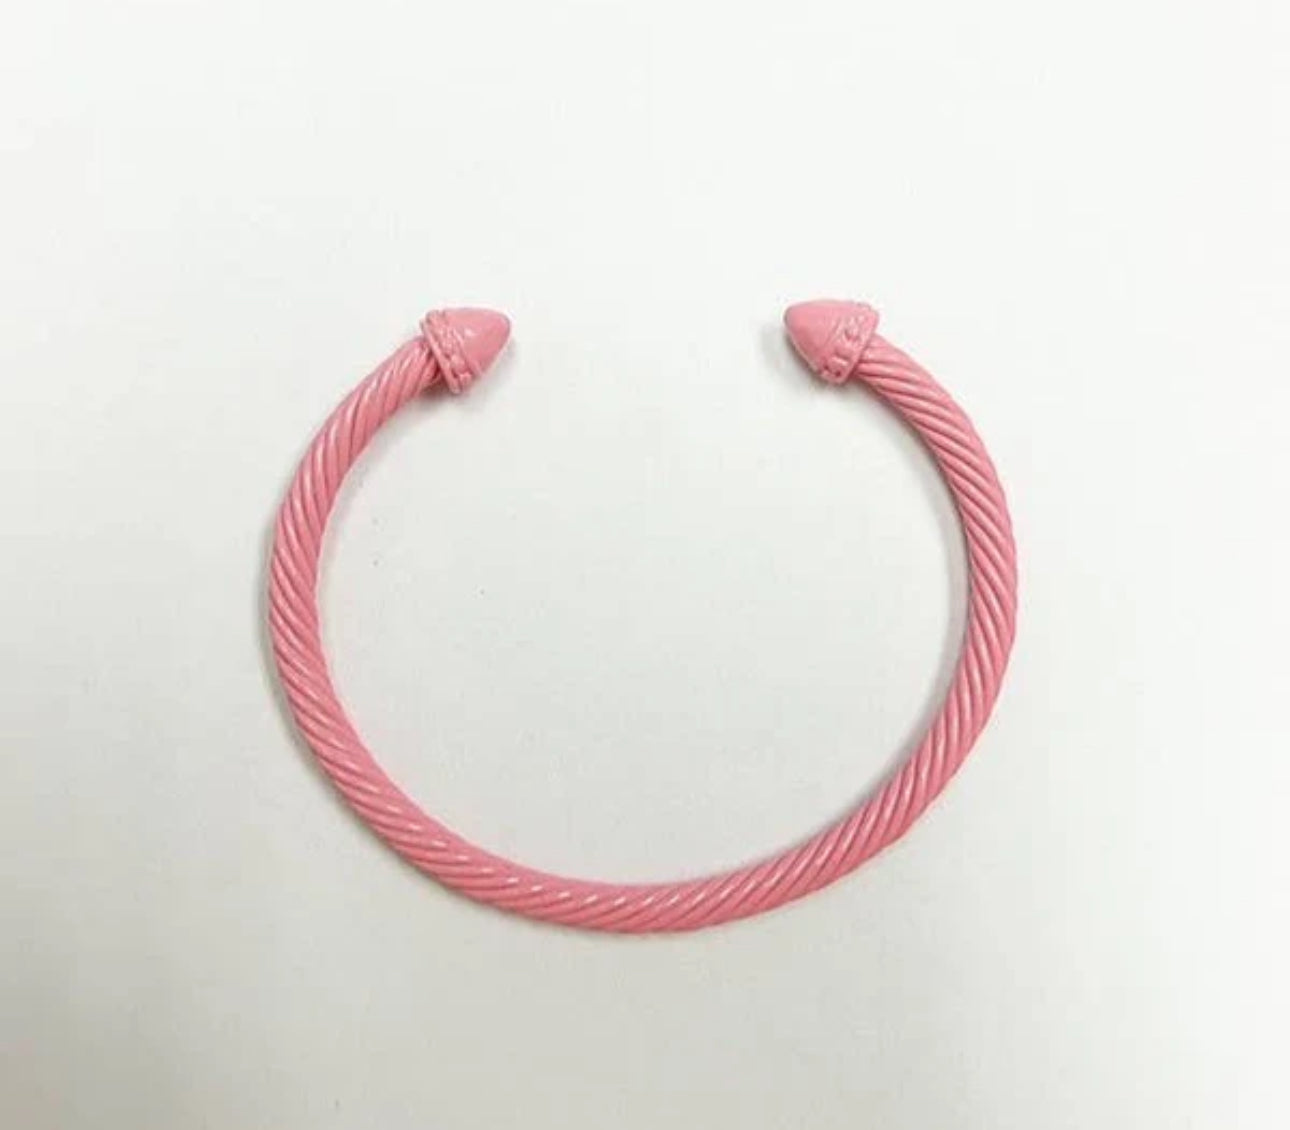 Colorful Cable Cuffs - Thin Pink